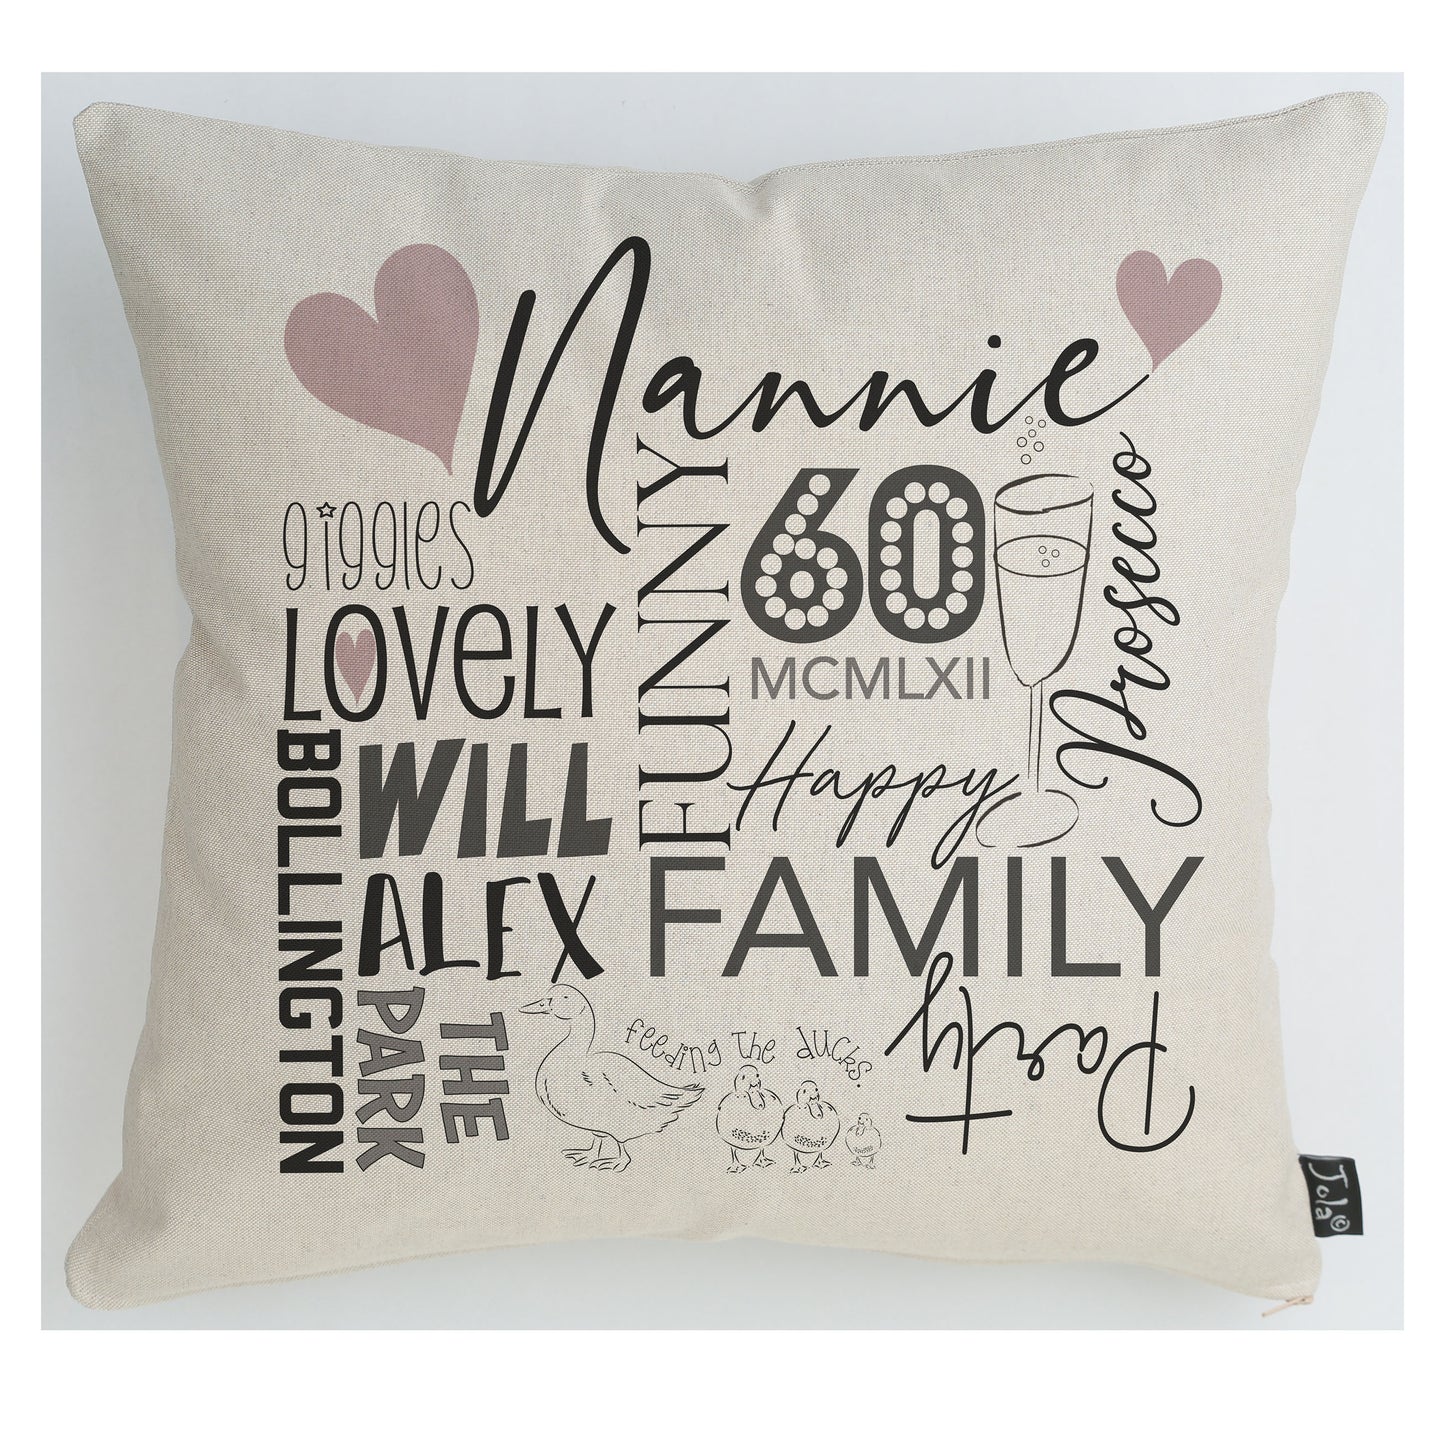 Personalised Typography Cushion